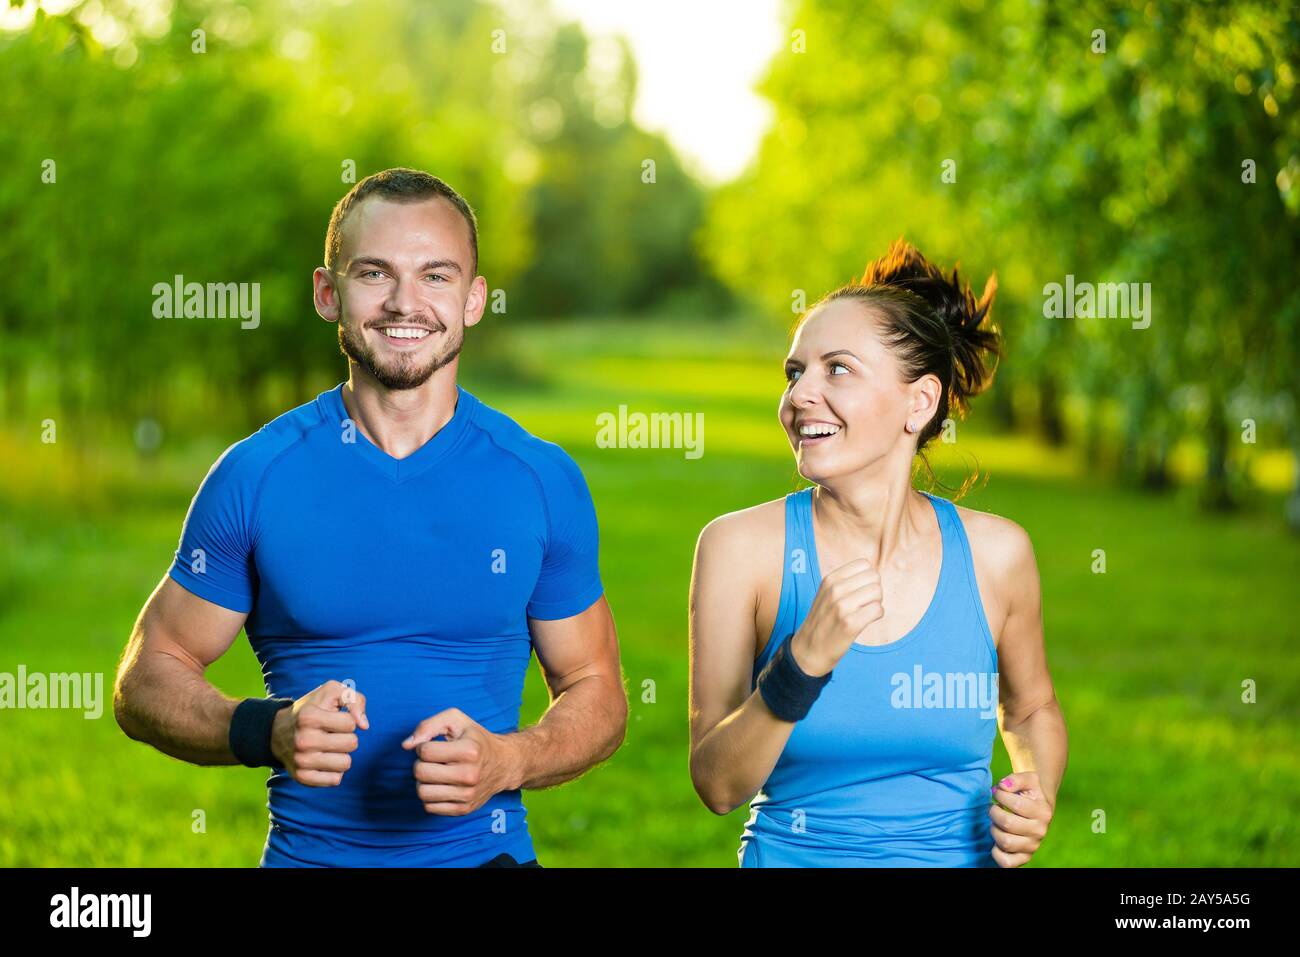 Runners training outdoors working out. City running couple jogging outside. Stock Photo